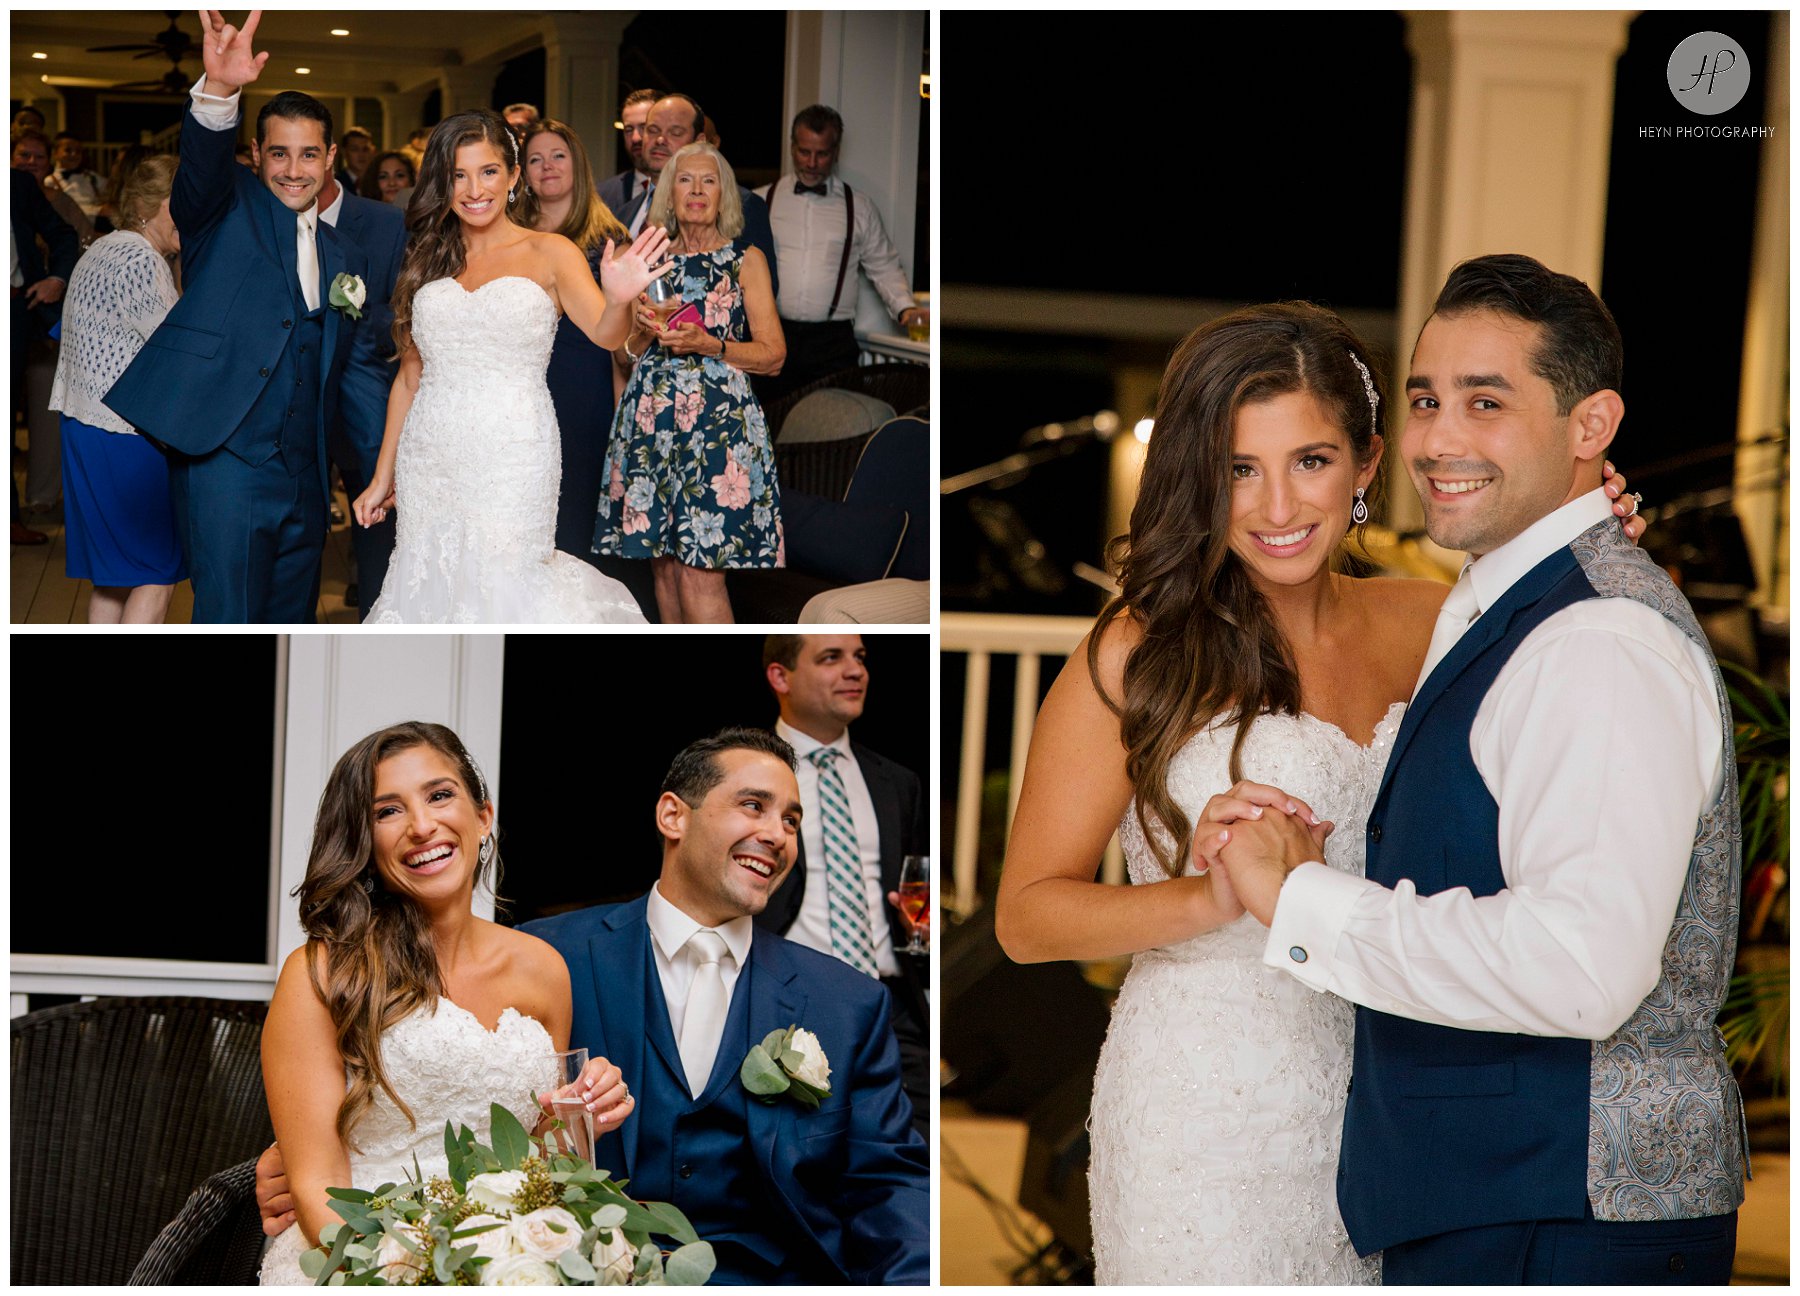 bride and groom first dance at edgewater beach club wedding in new jersey